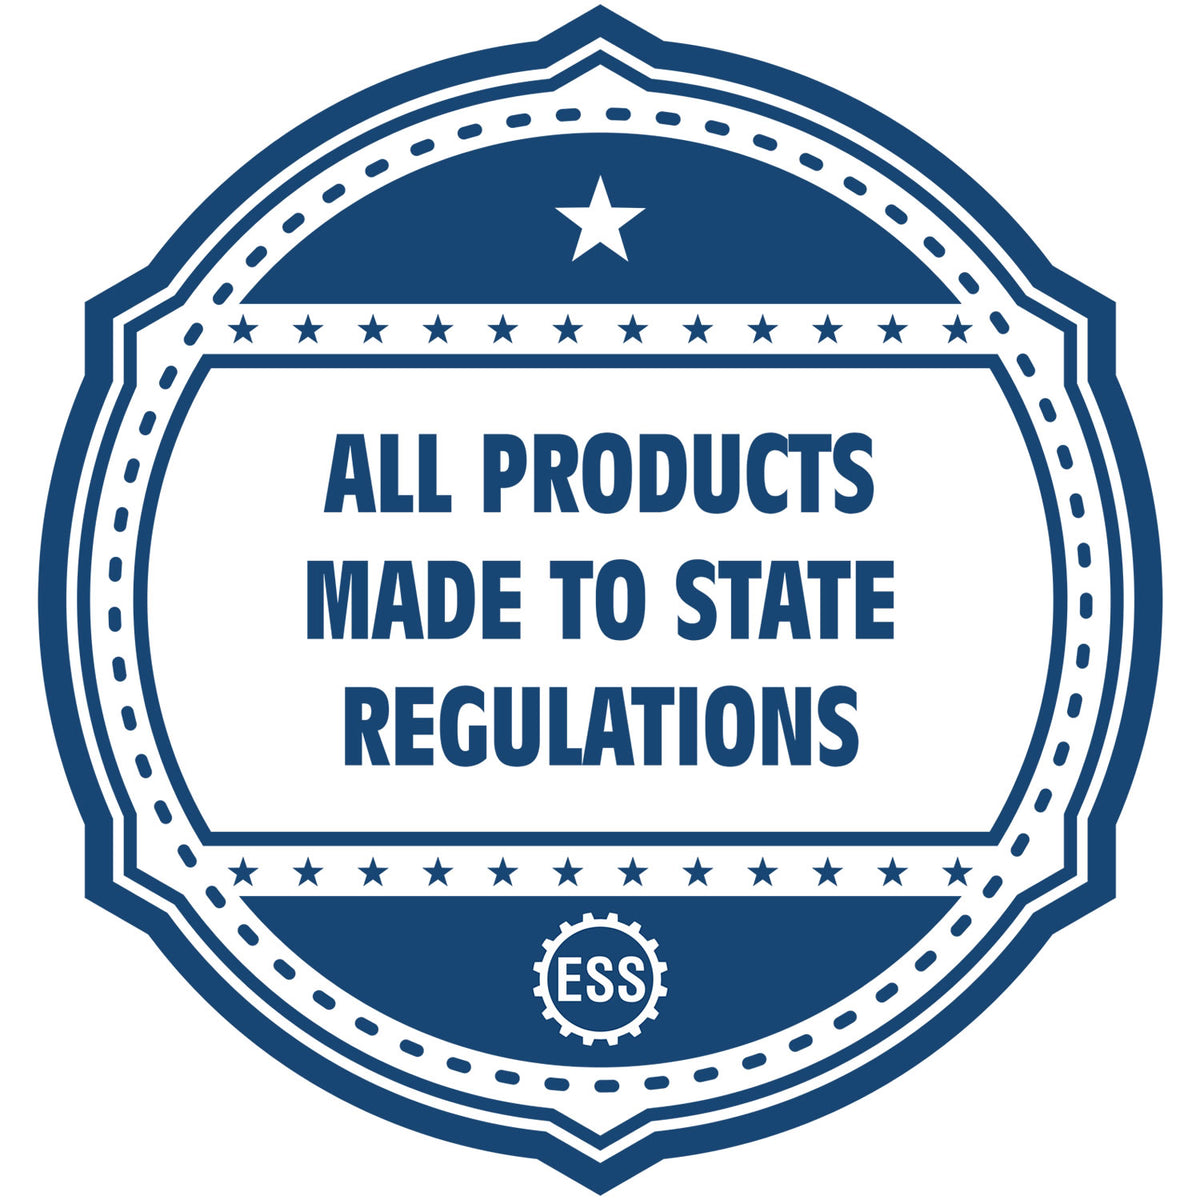 An icon or badge element for the State of South Dakota Long Reach Architectural Embossing Seal showing that this product is made in compliance with state regulations.